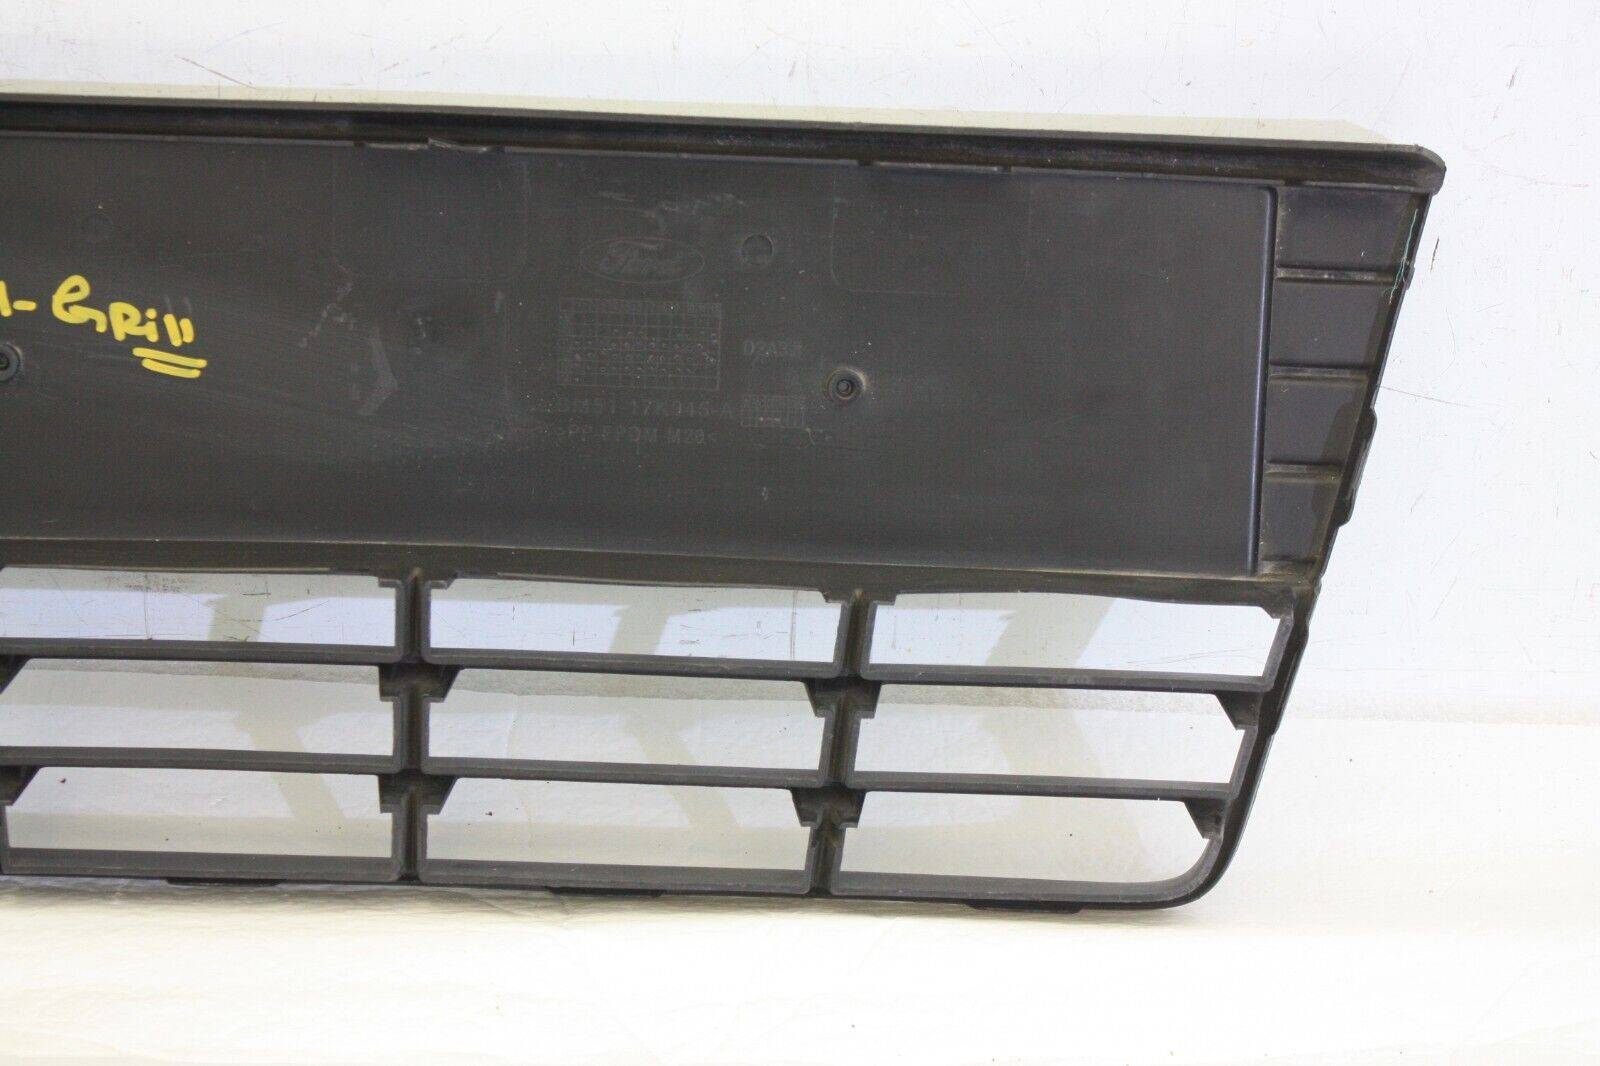 Ford-Focus-Front-Bumper-Grill-2011-TO-2014-BM51-17K945-A-Genuine-176247746081-11